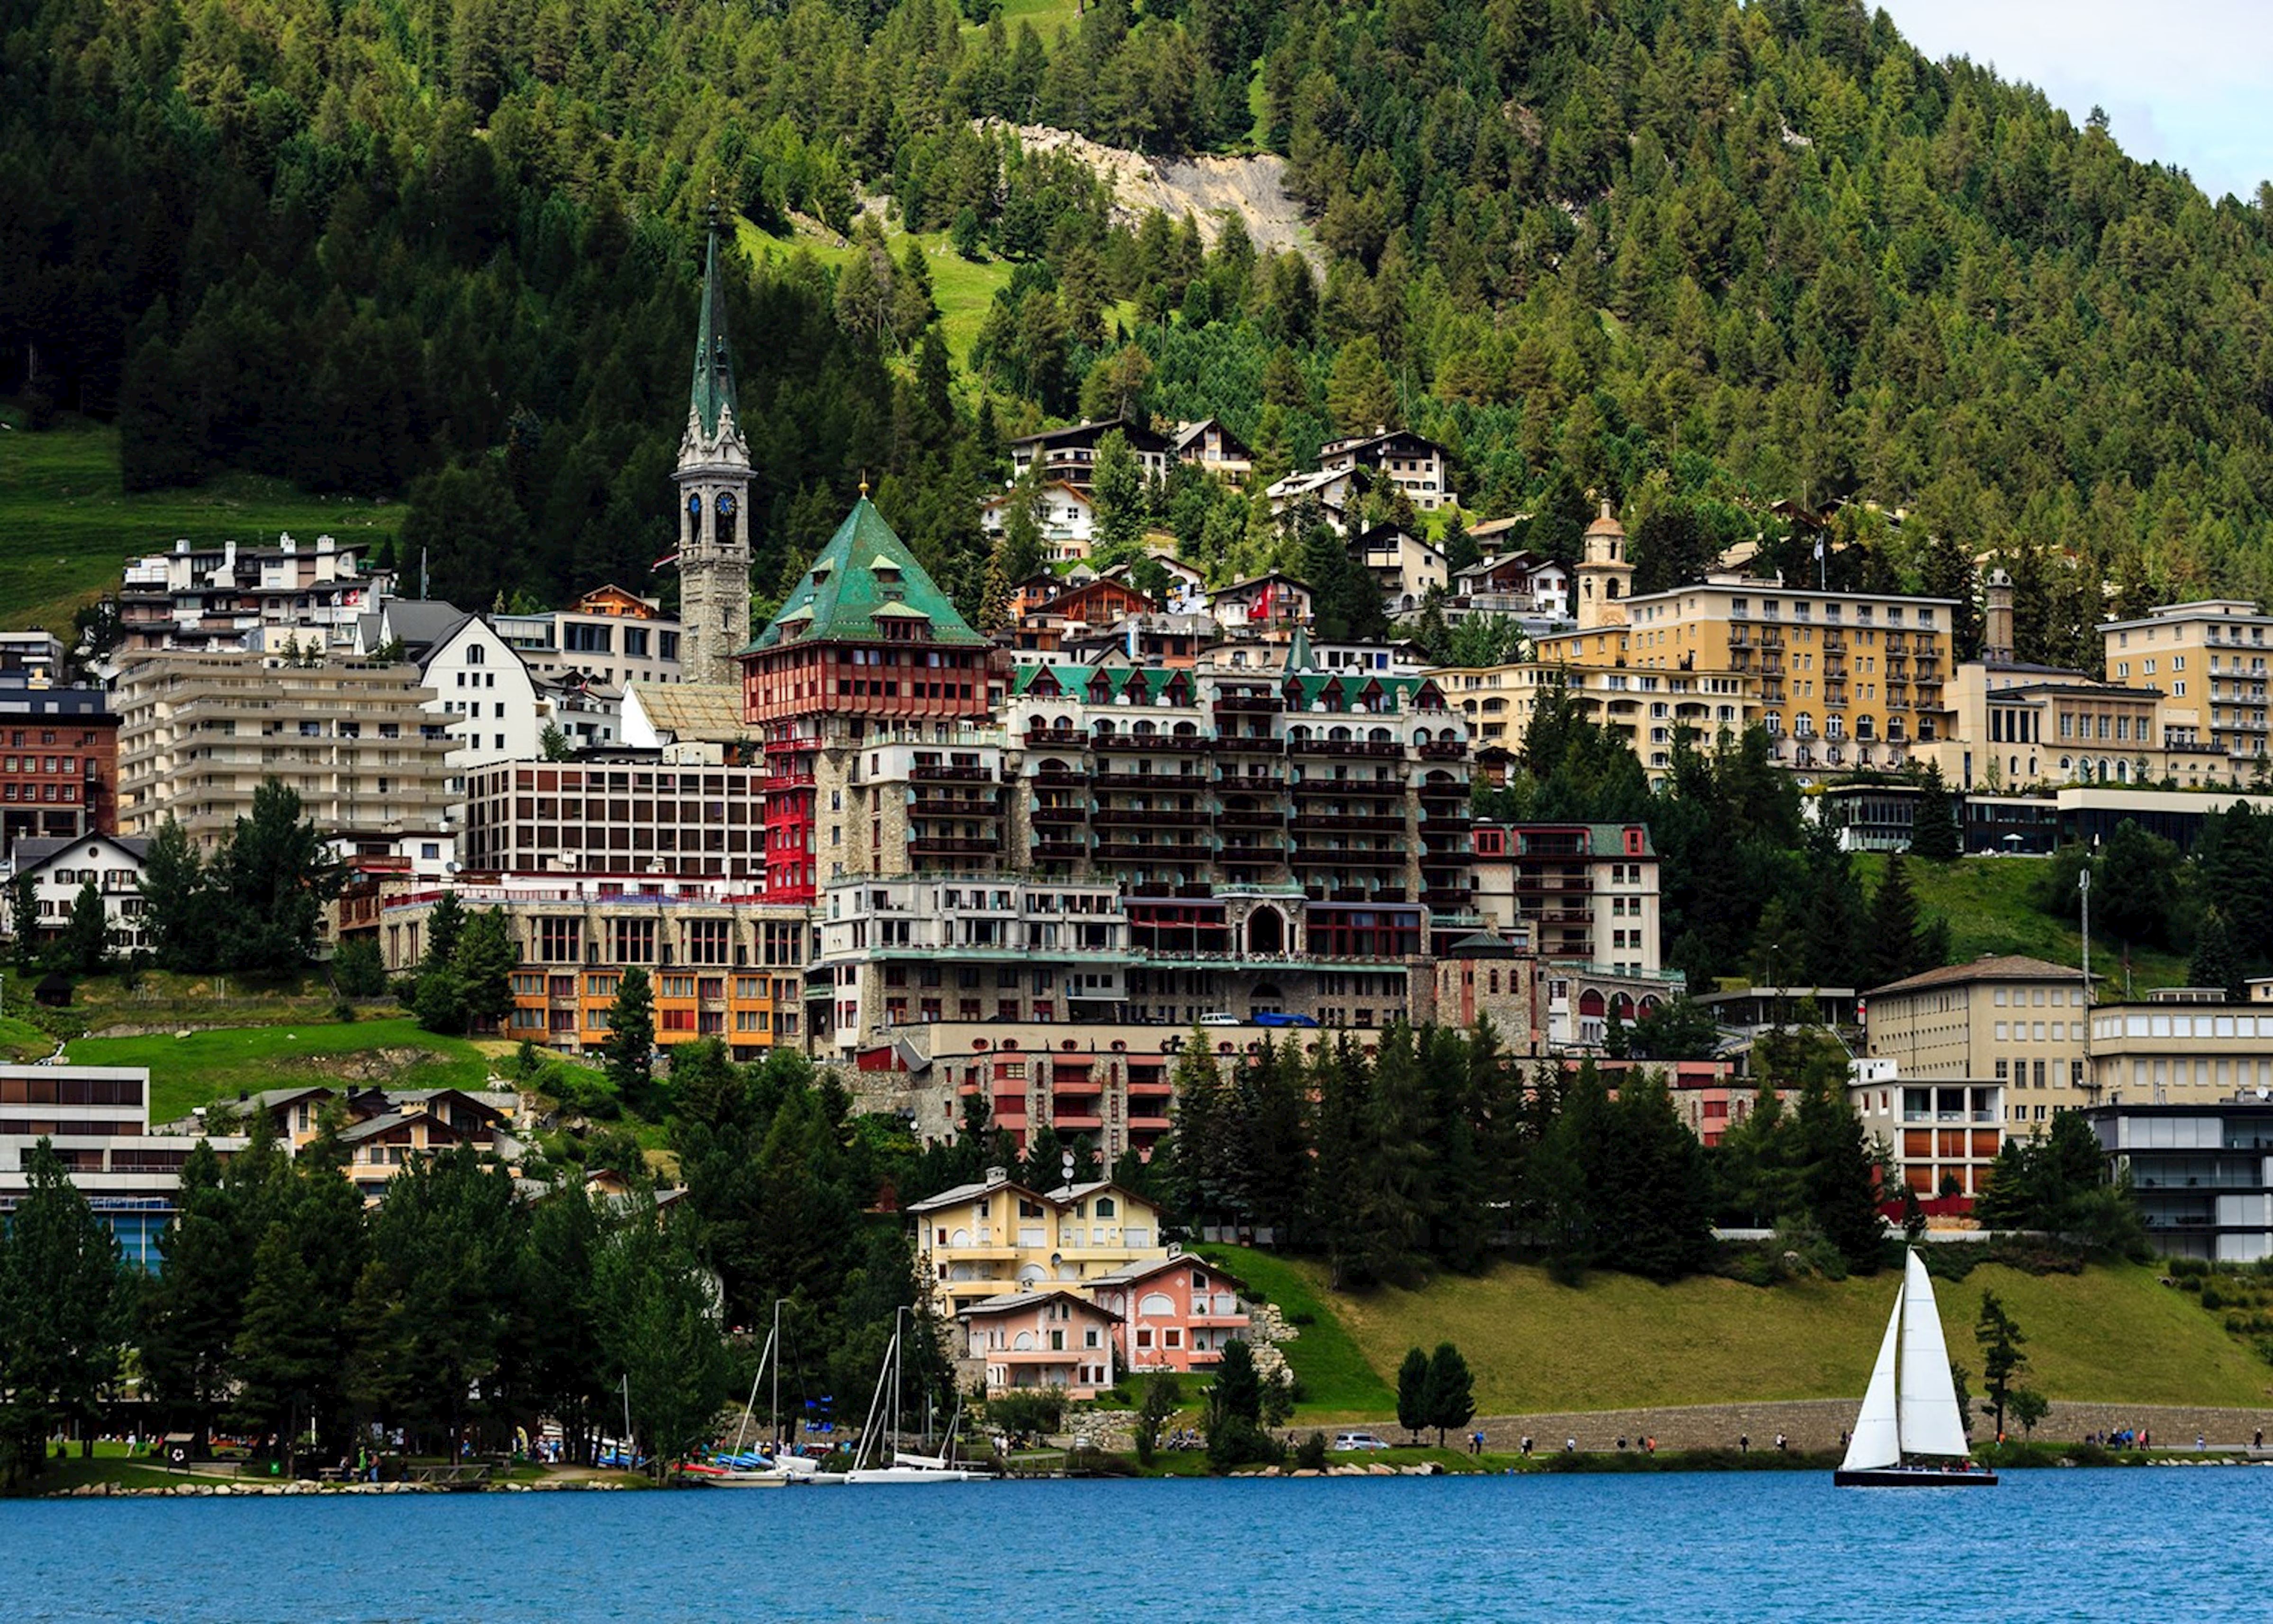 Visit St. Moritz on a trip to Switzerland | Audley Travel US